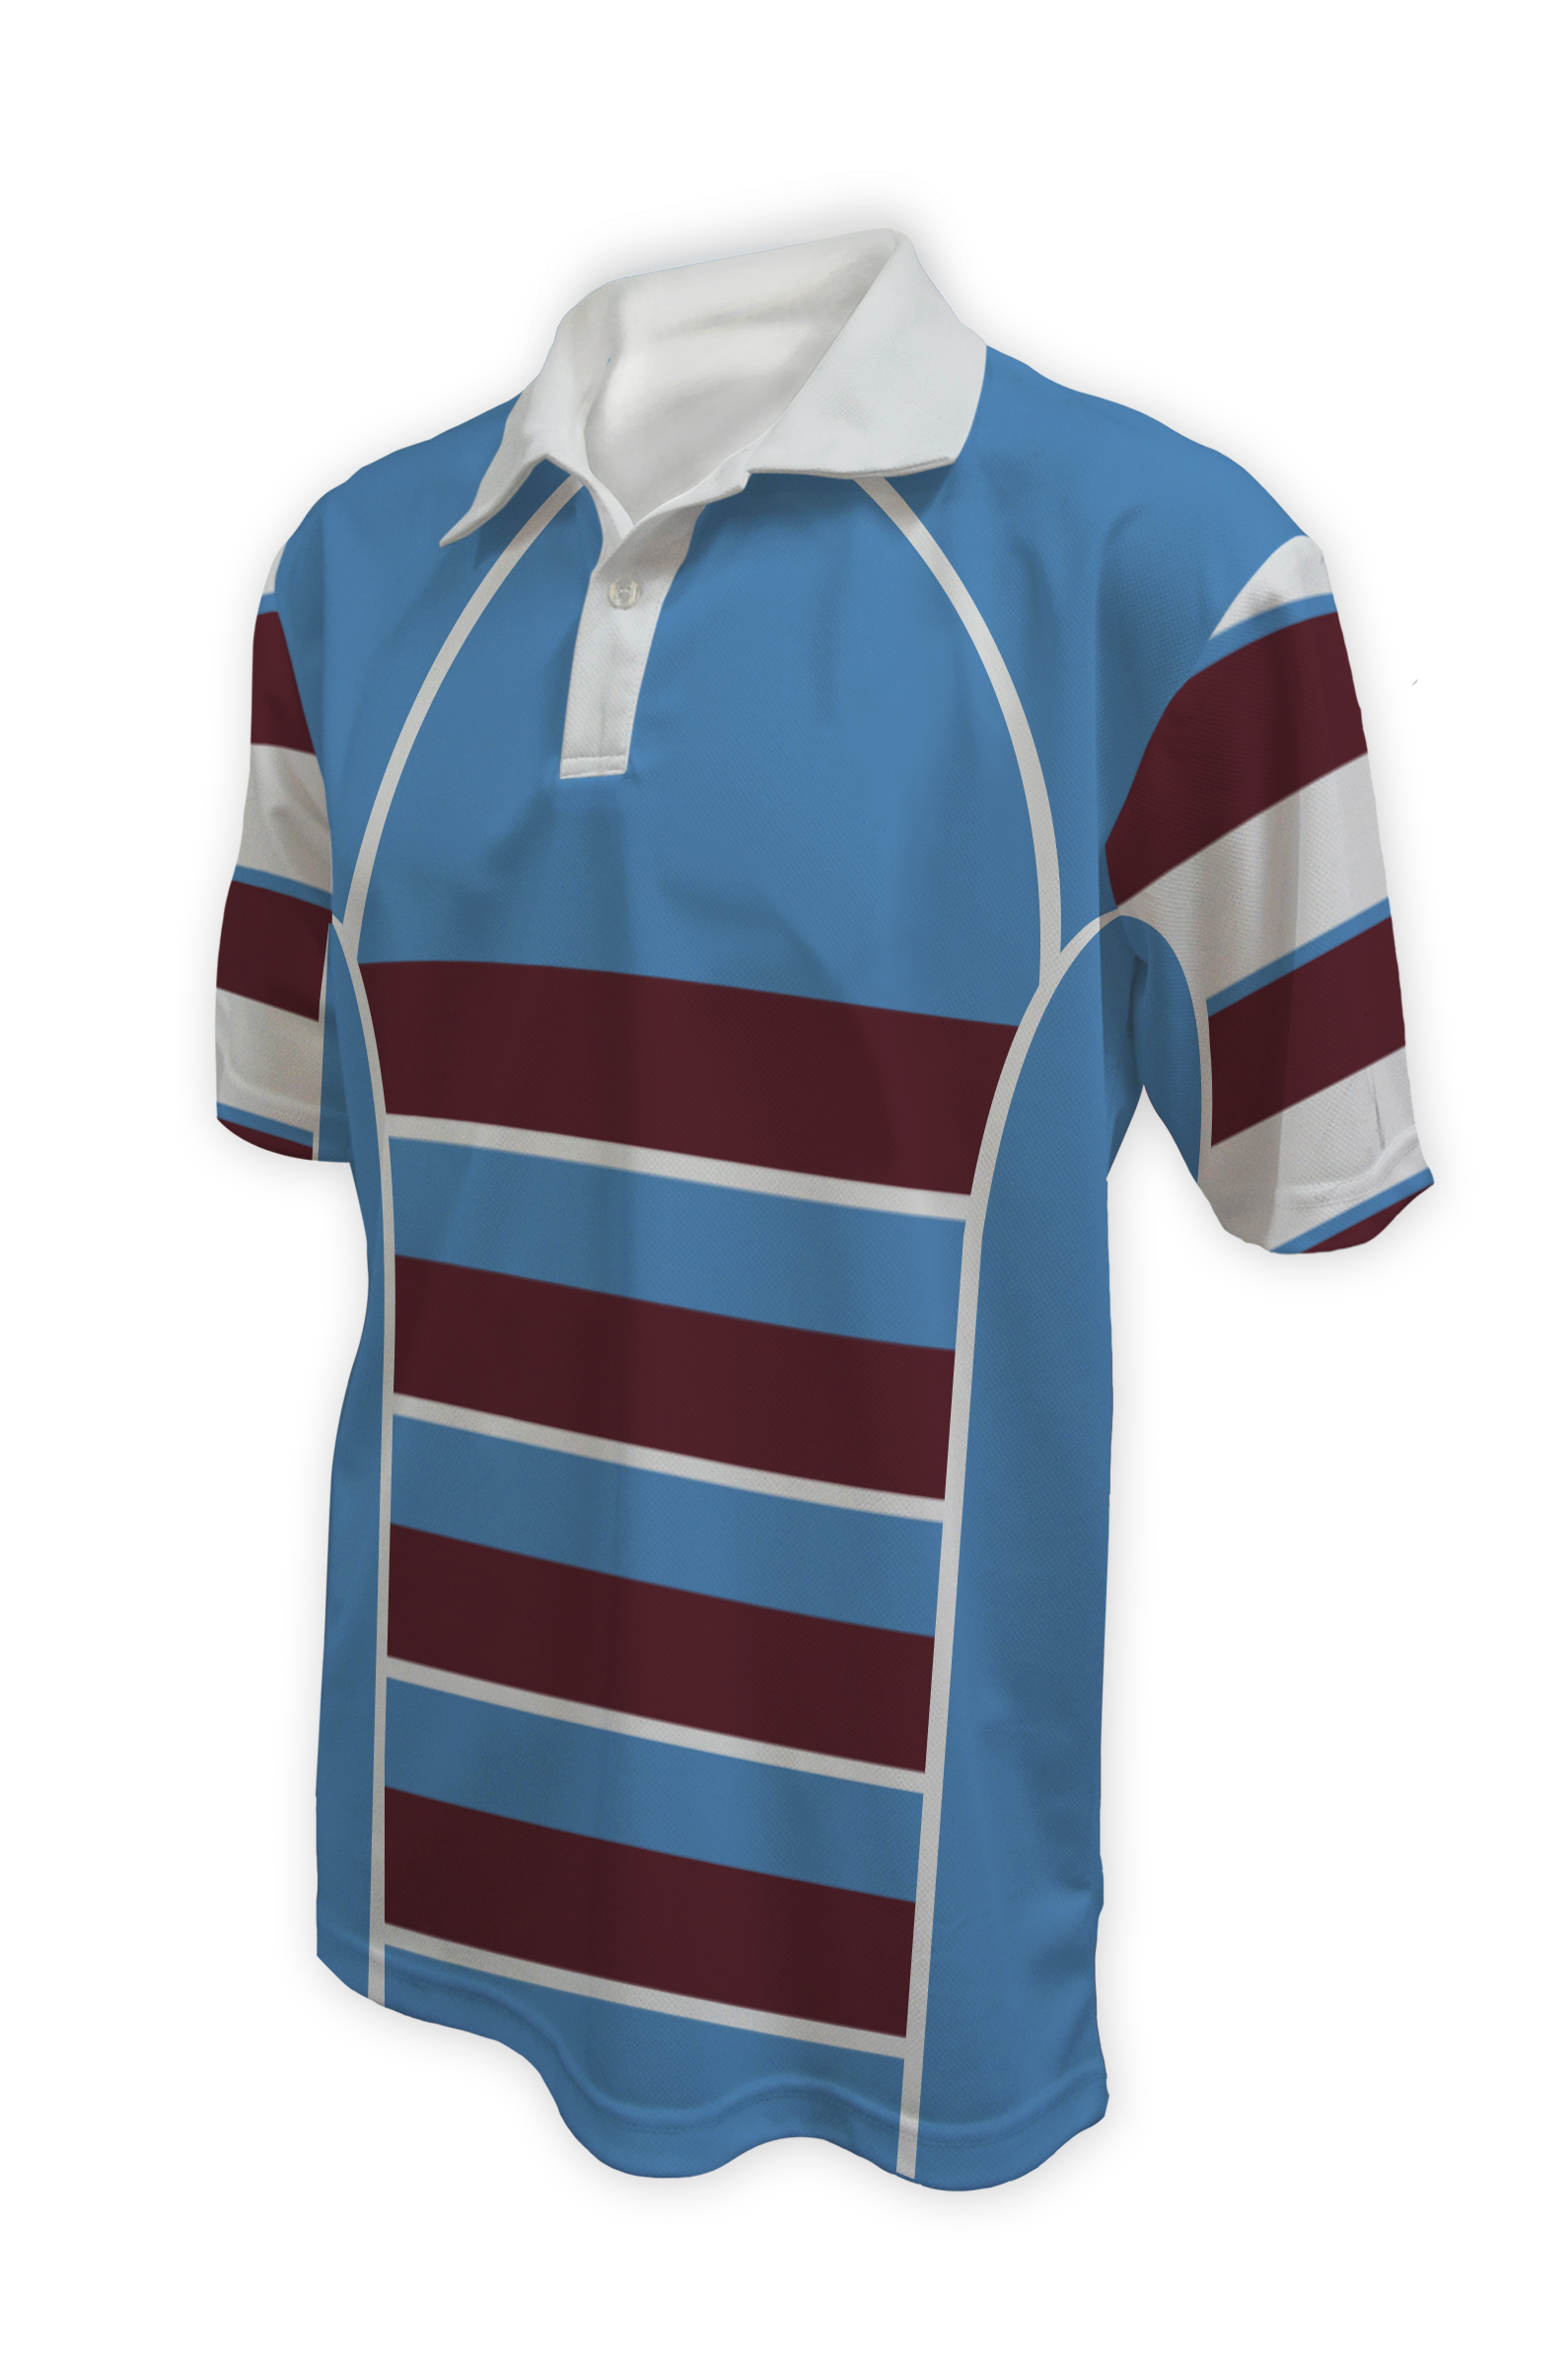 Rugby Polo - Great Prices Rugby Kits | Captivations | Custom Clothing ...